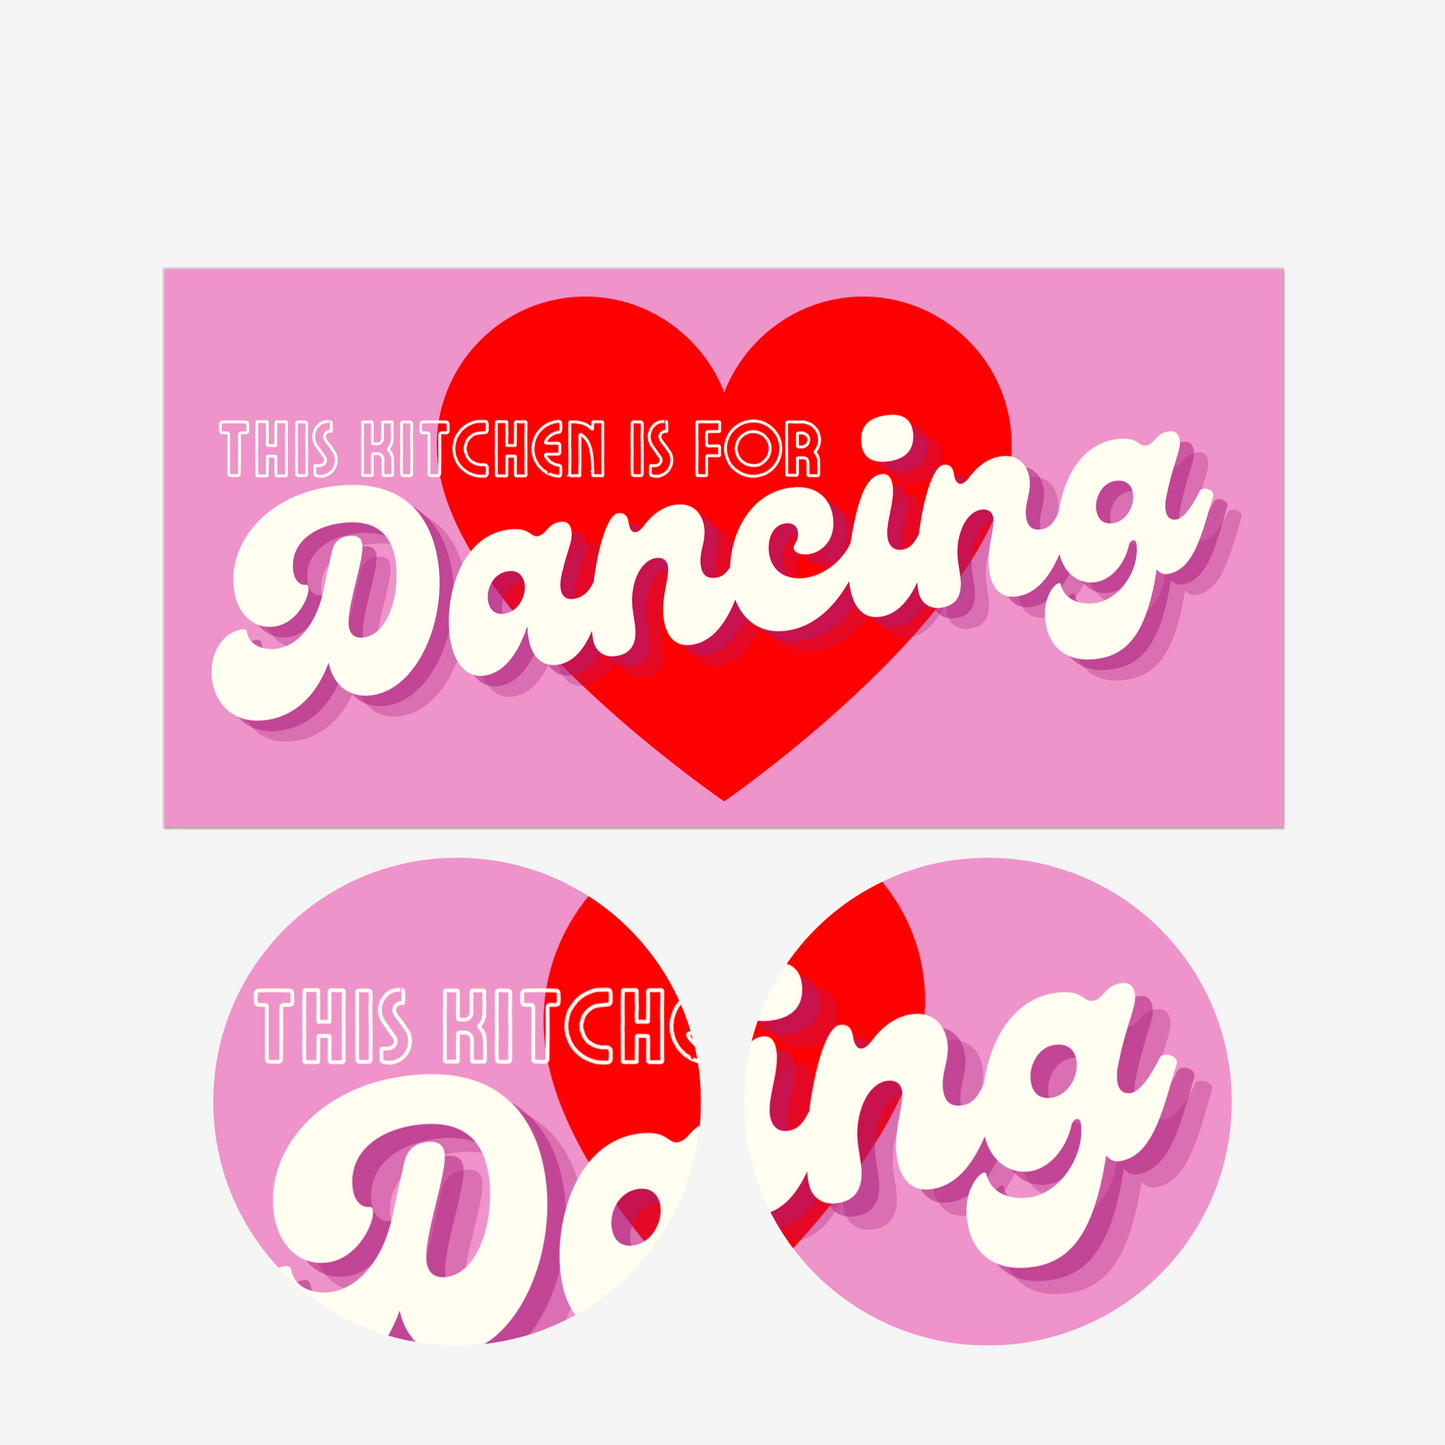 This Kitchen Is For Dancing is the perfect addition to any kitchen with a sense of fun and quirkiness. The catchy phrase and retro pink style make it a truly unique art print that is sure to bring a smile to your face every time you see it.